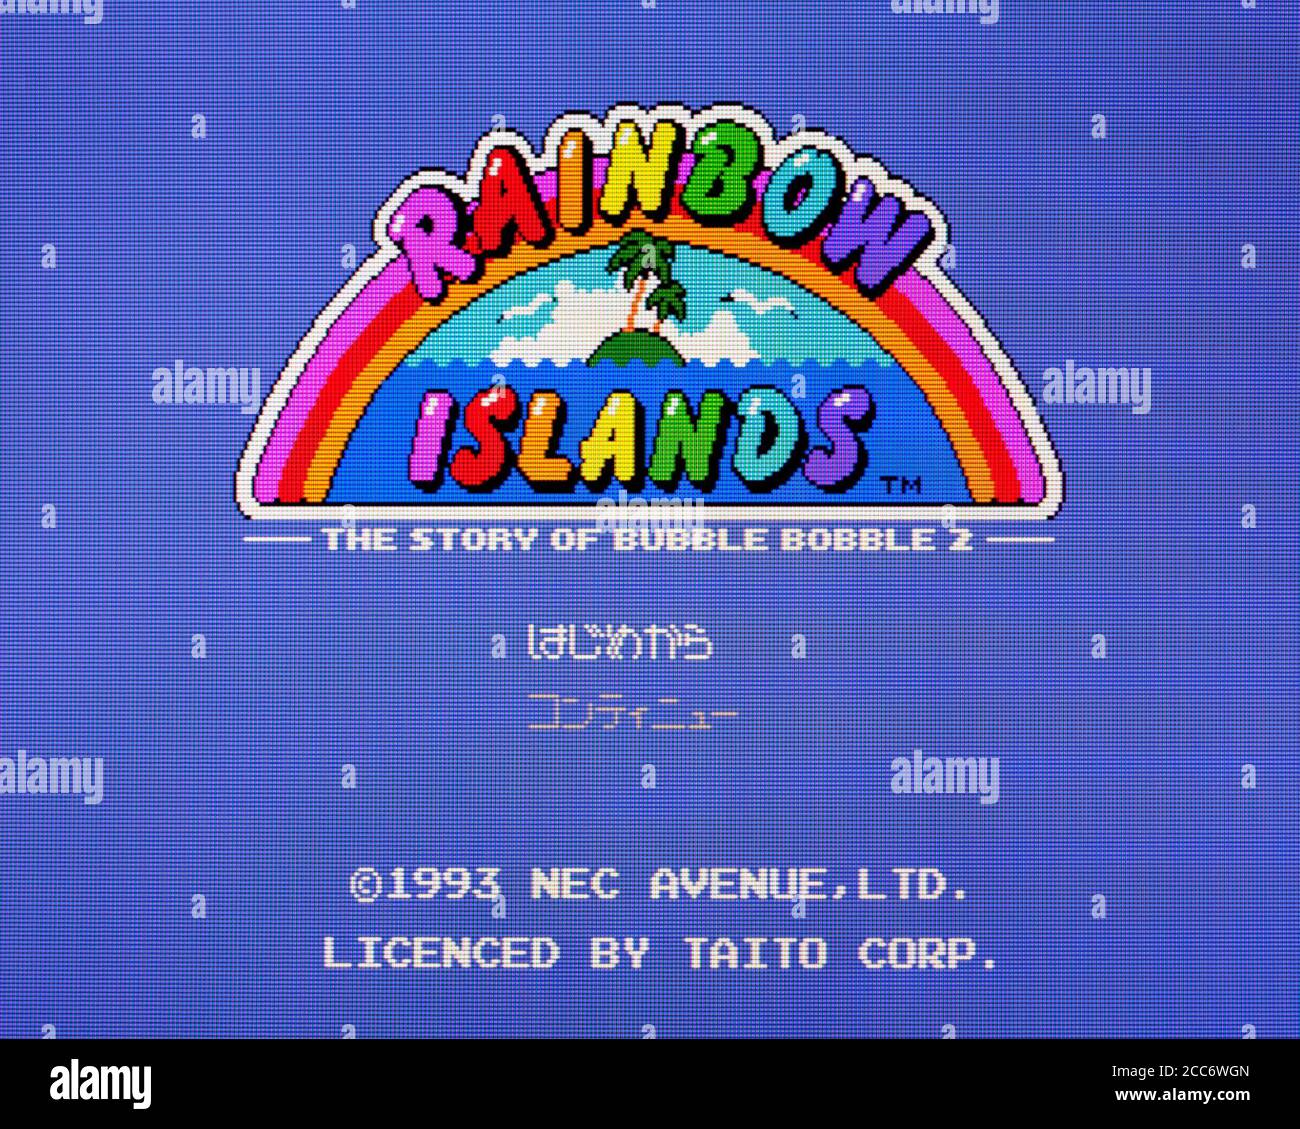 Rainbow Islands - PC Engine CD Videogame - Editorial use only Stock Photo